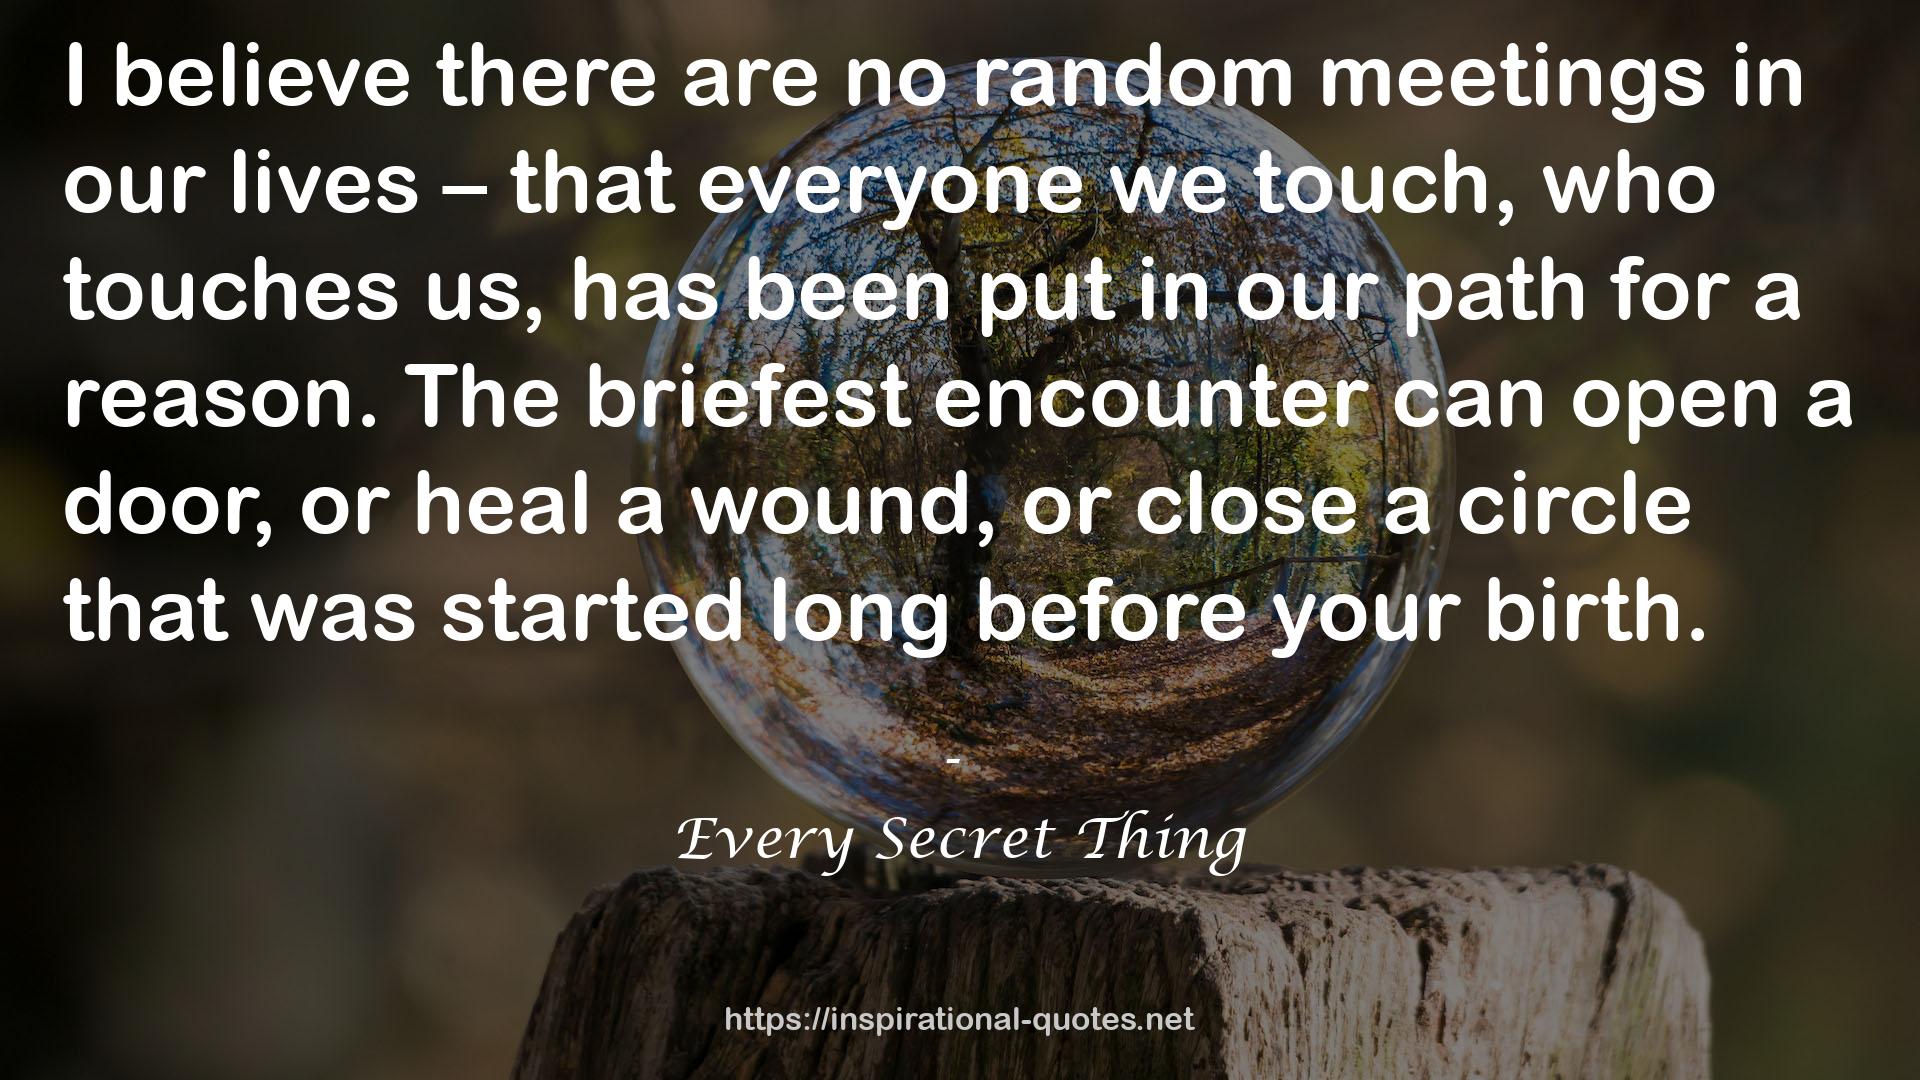 Every Secret Thing QUOTES